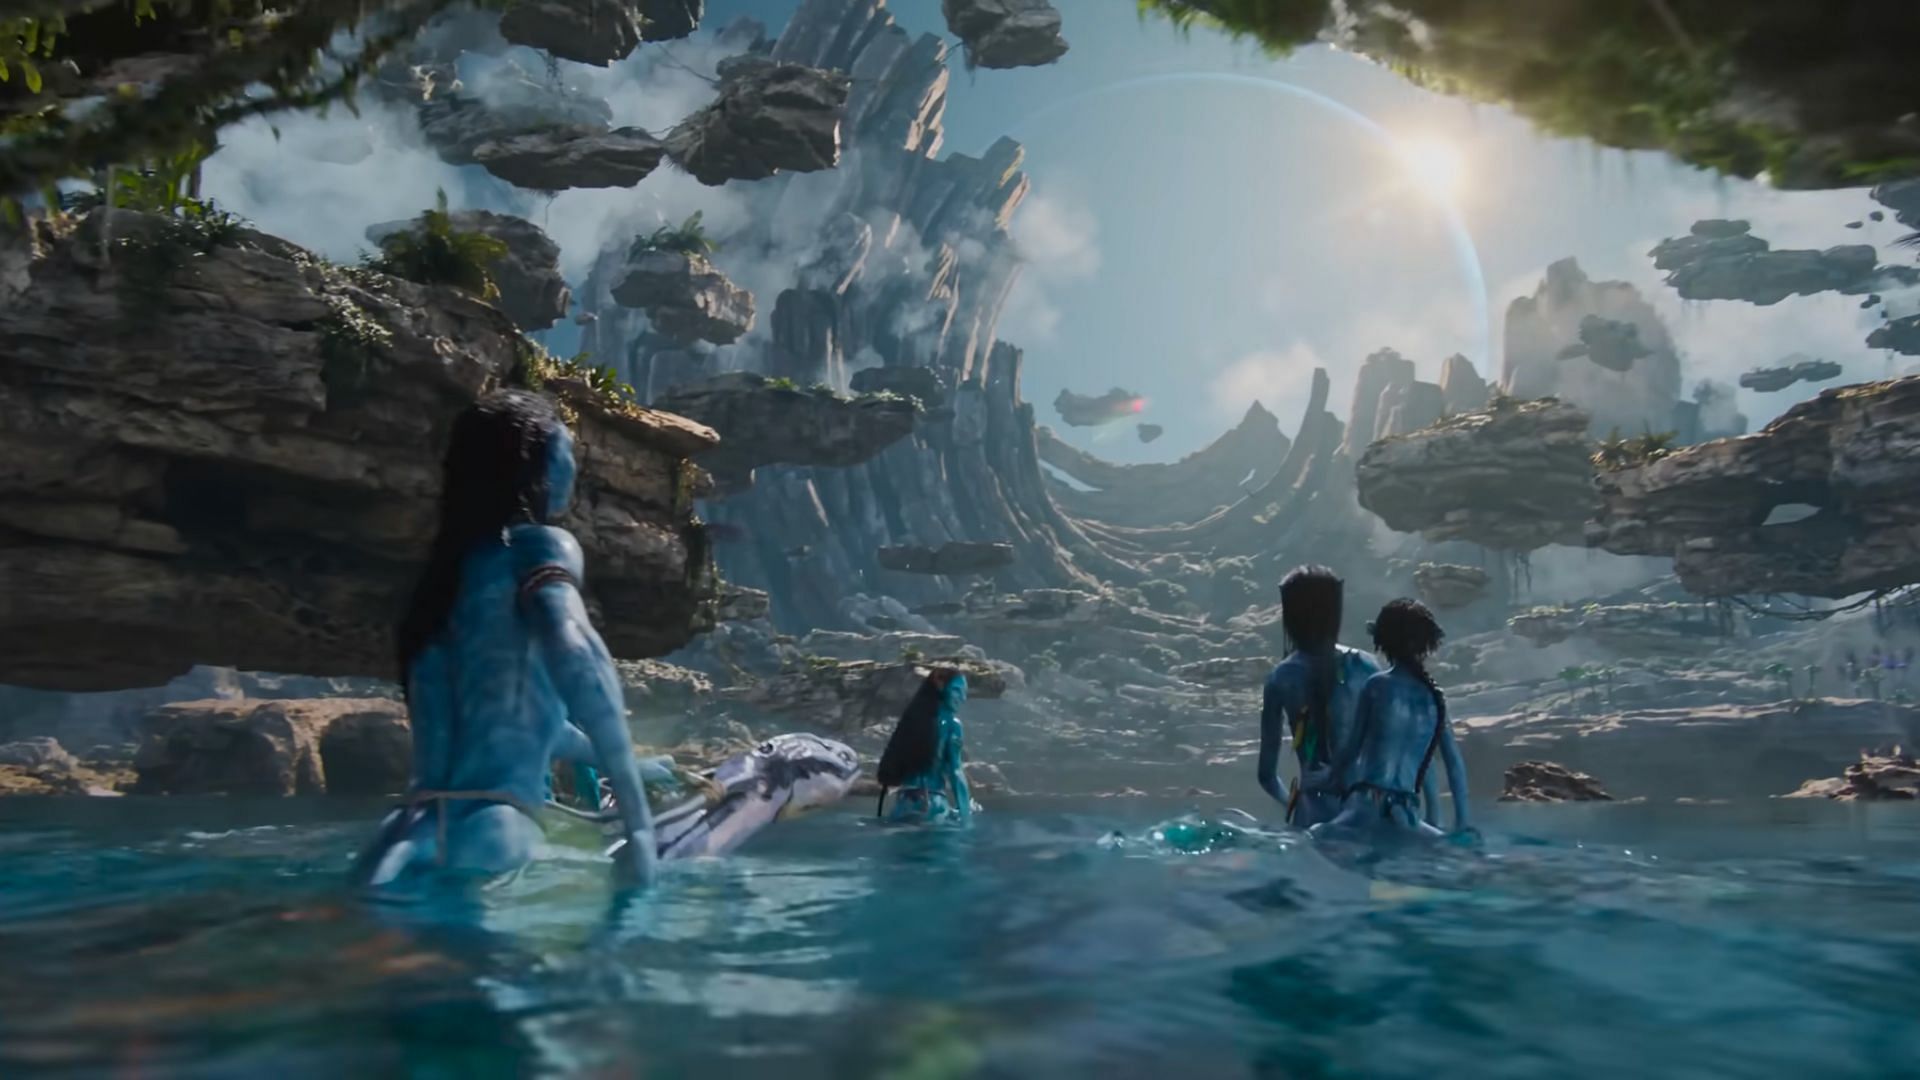 The Na&#039;vi people believe that Eywa can communicate with them through the natural world (Image via YouTube/IMAX)